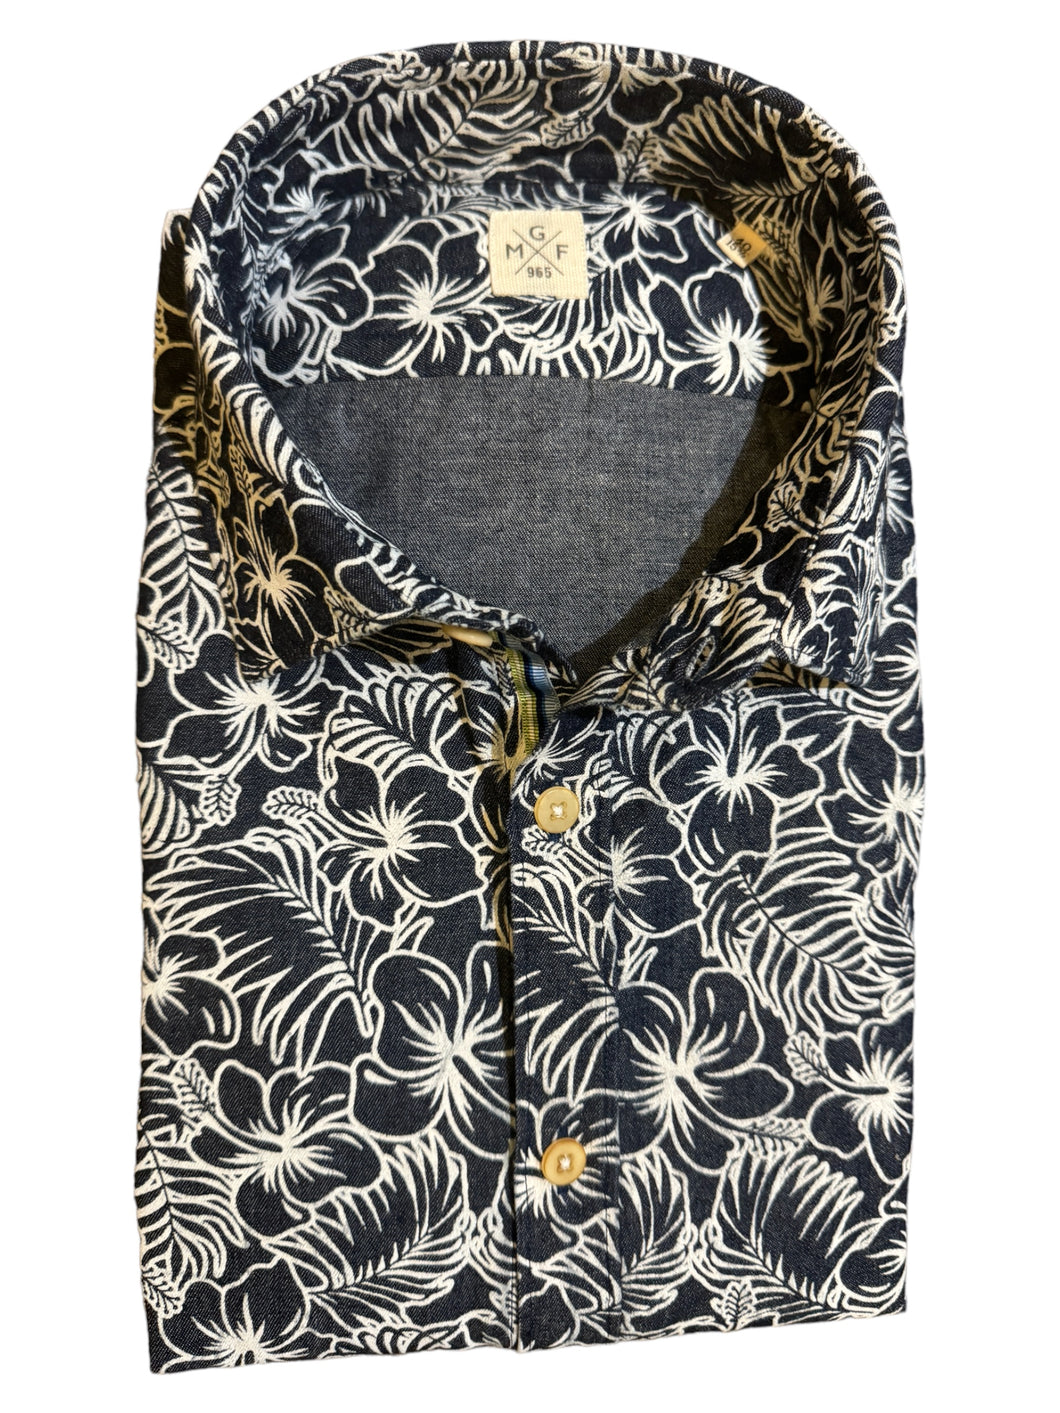 GMF 965 SS Cotton Shirt Navy Floral